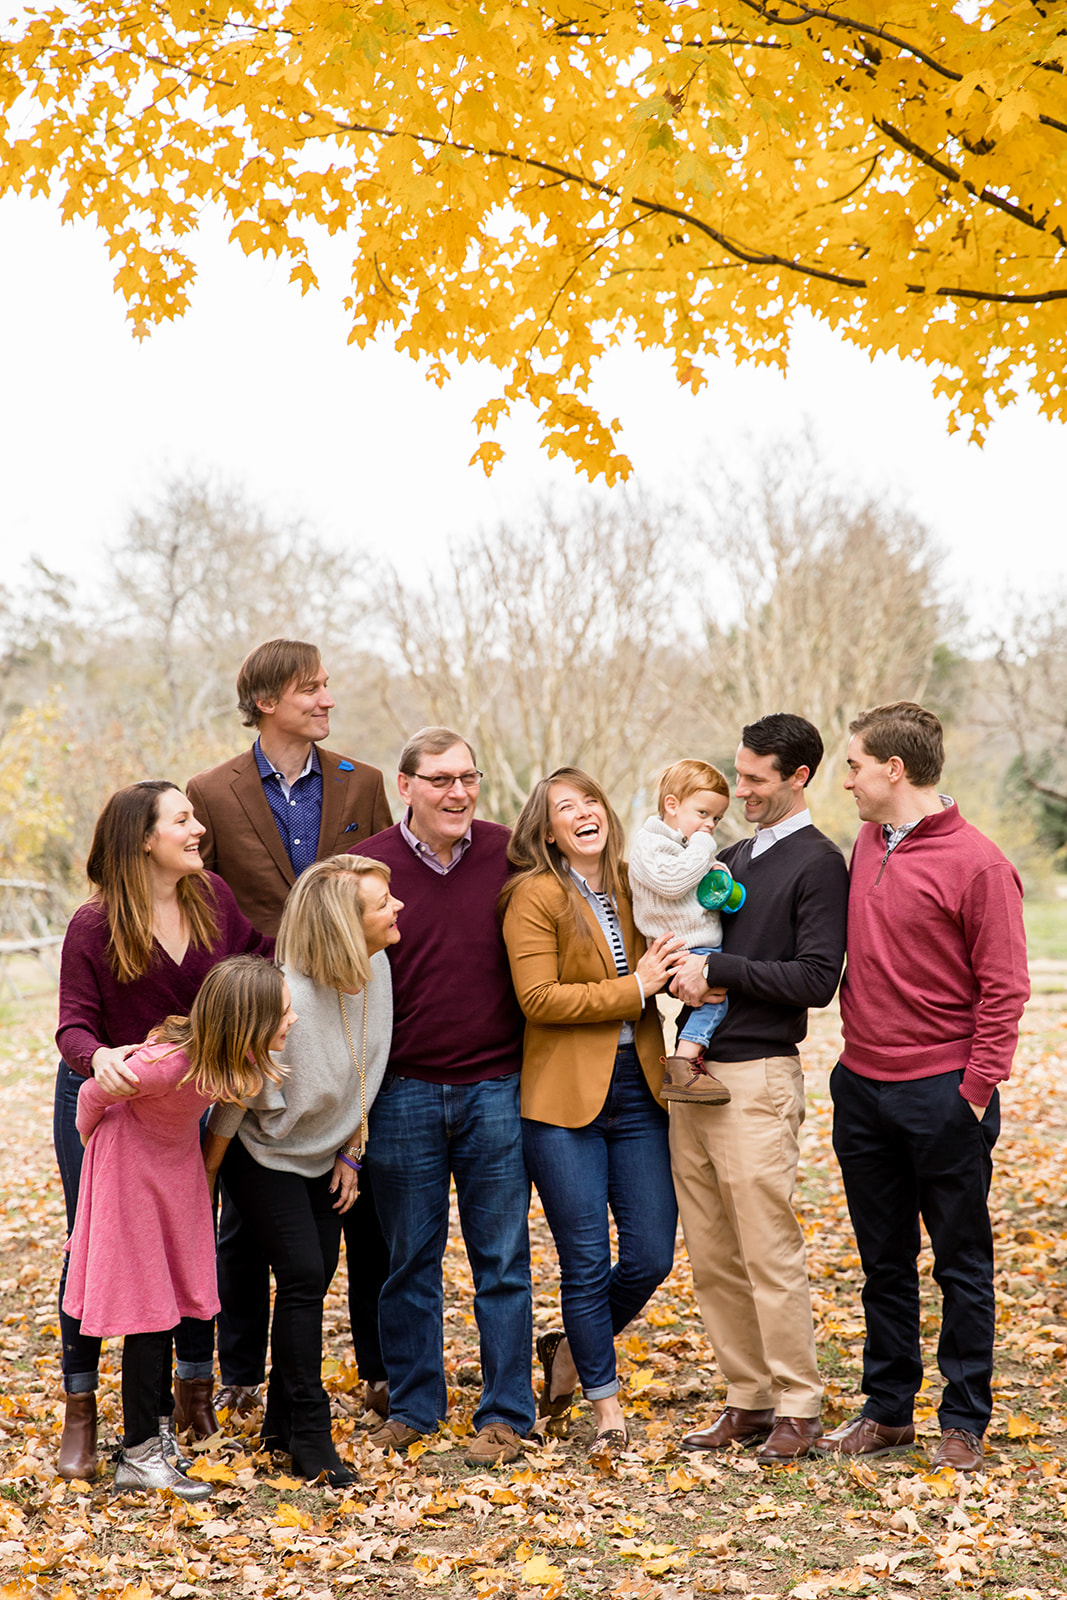 Large Fall Family Photo Shoot With Adult Children at Tuckahoe Plantation - Image Property of www.j-dphoto.com